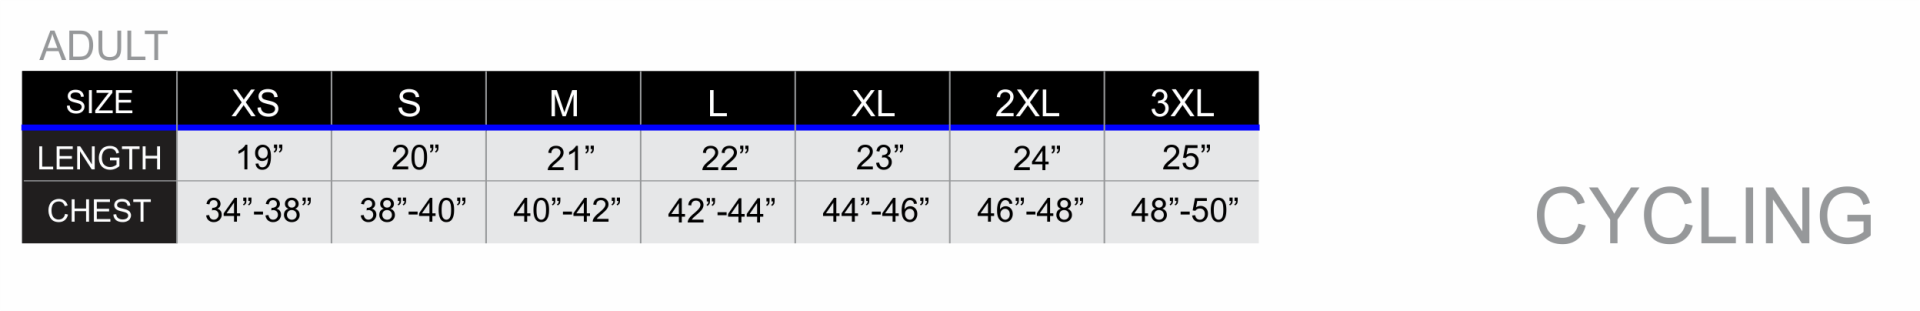 All over print cycling jersey sizing chart zexez